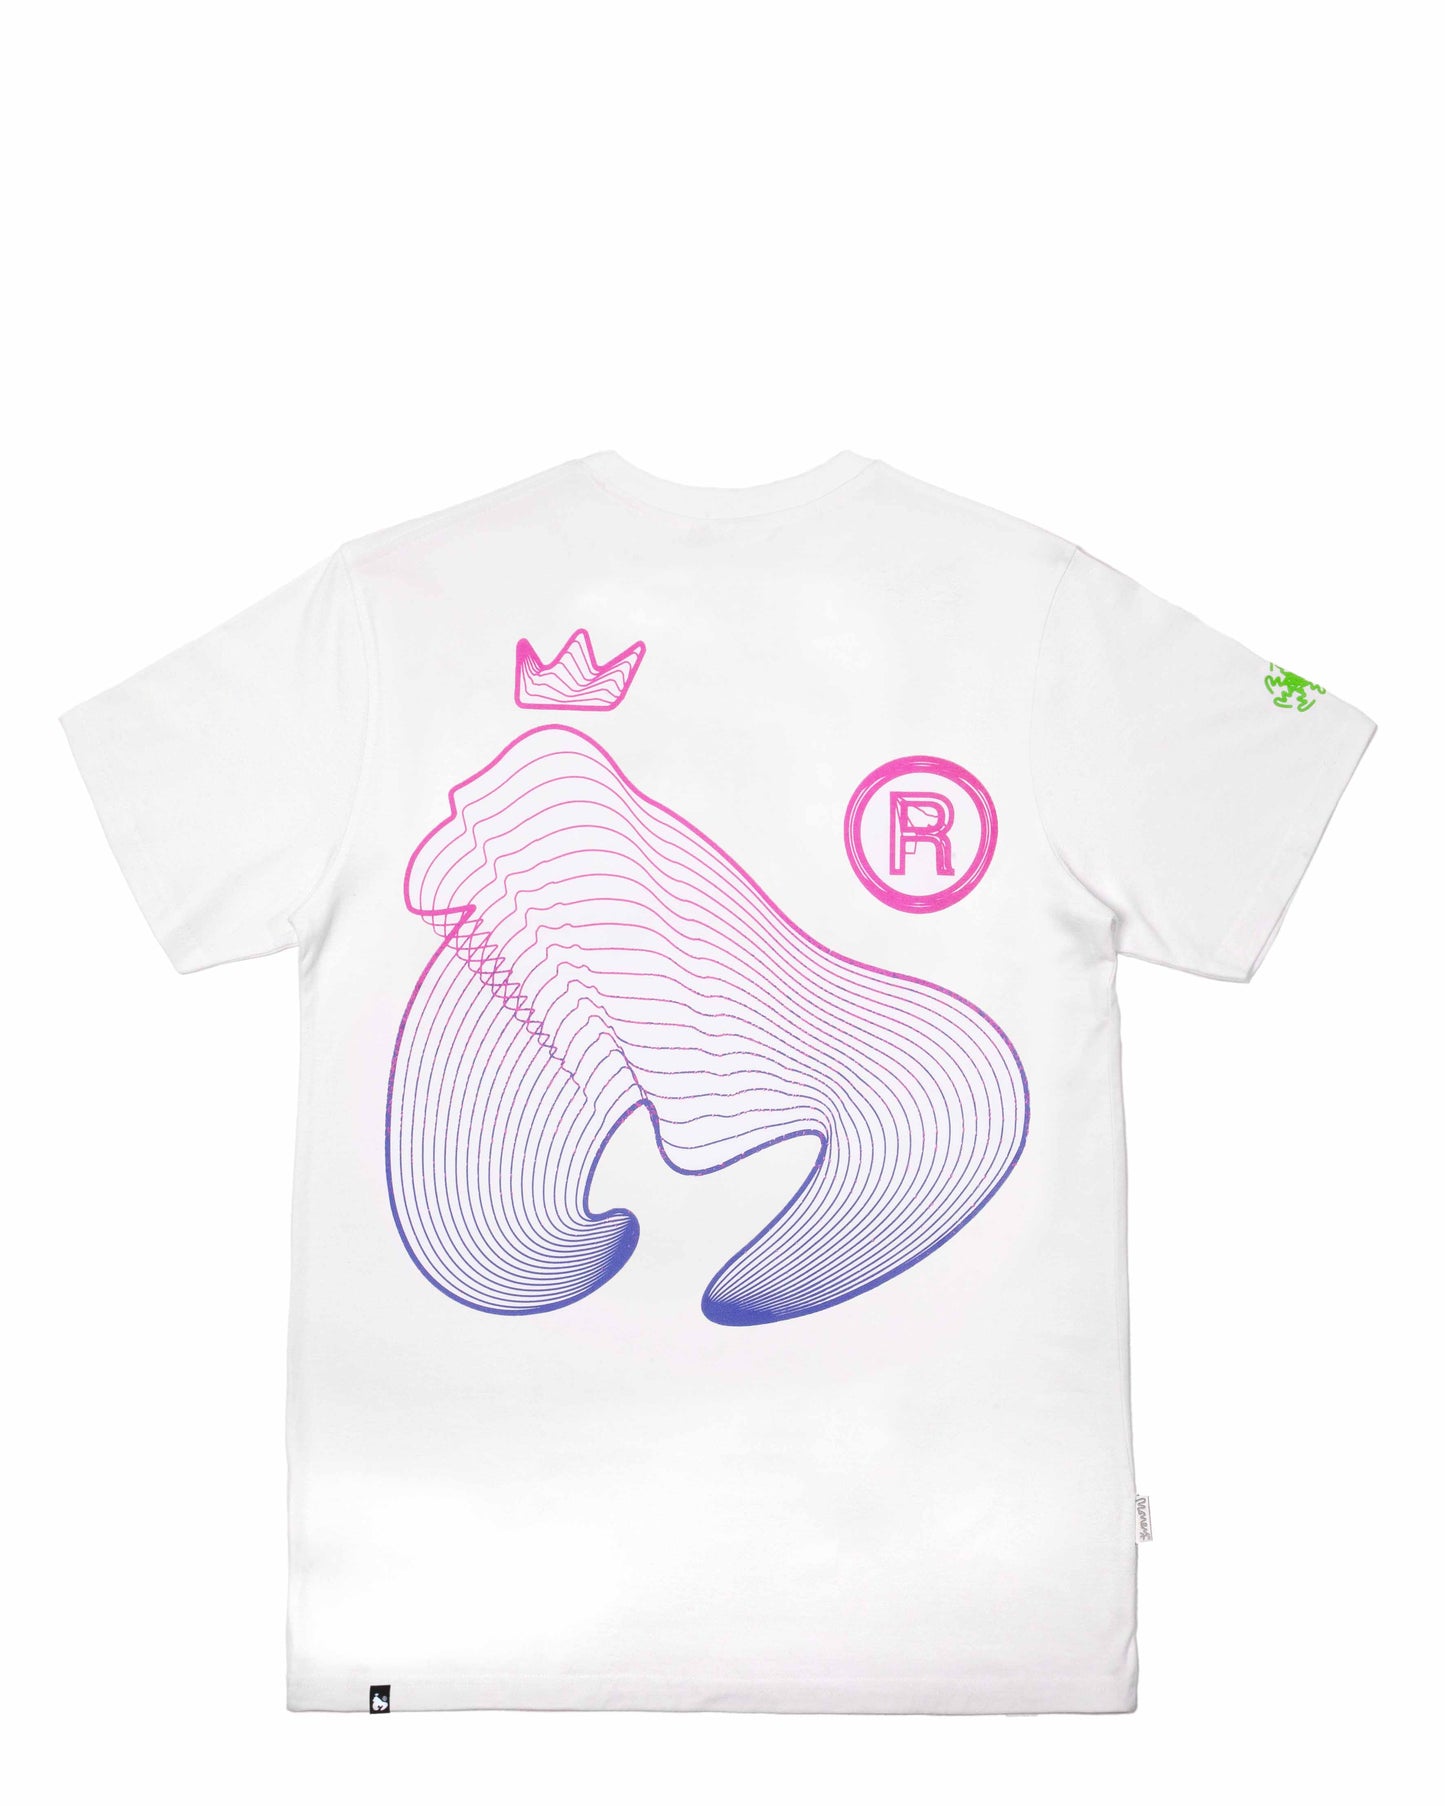 FLOW WAVE FADE TEE - WHITE